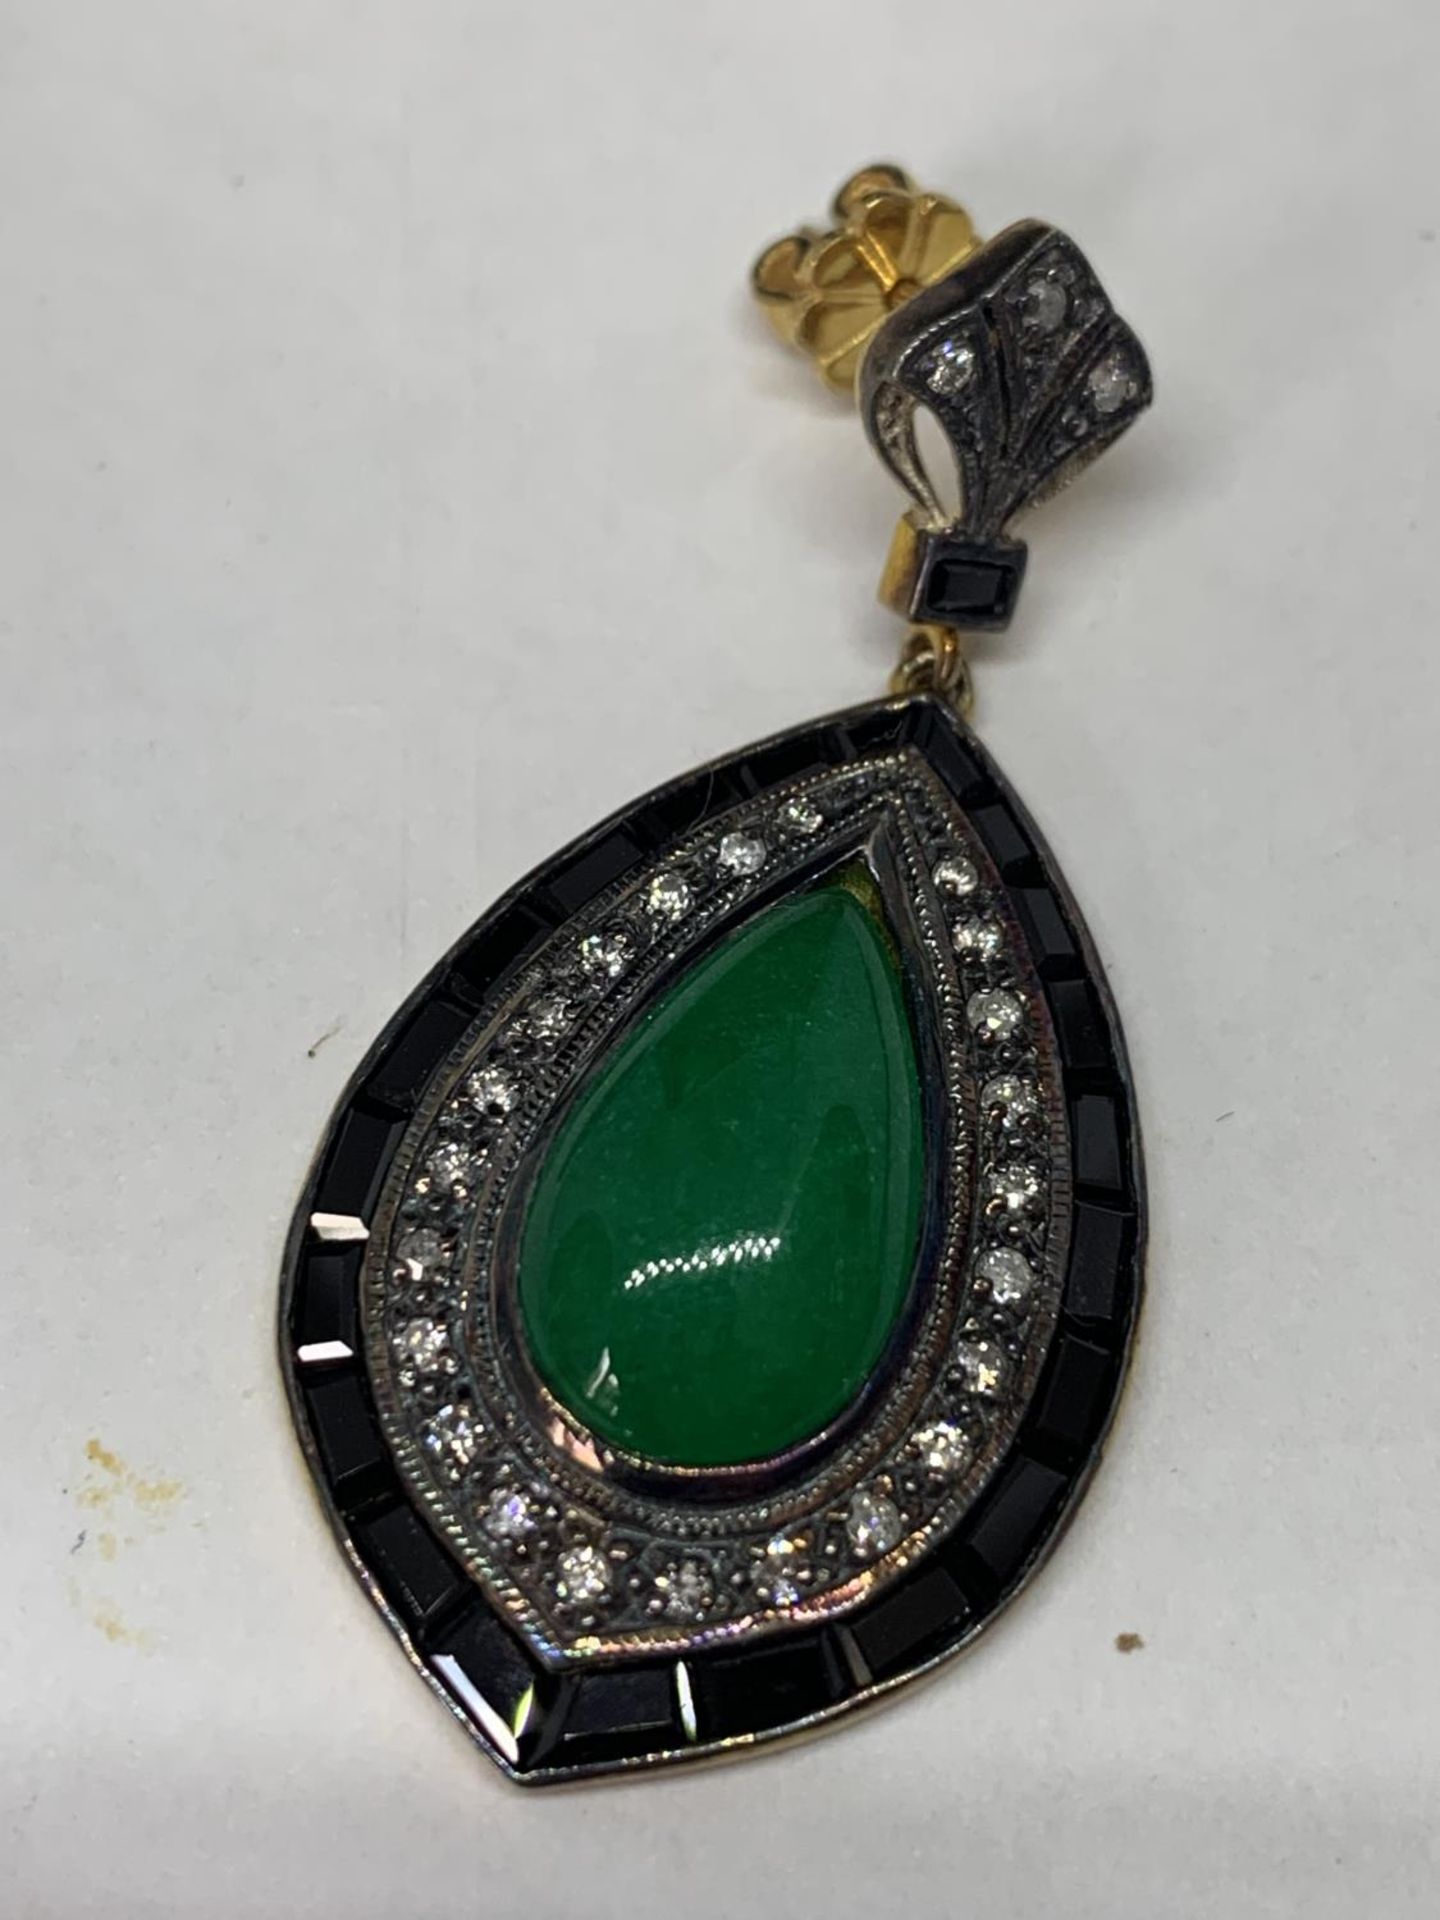 A PAIR OF JADE ON BLACK ONYX EARRINGS WITH DIAMOND SURROUND AND YELLOW AND WHITE METAL - Image 3 of 4